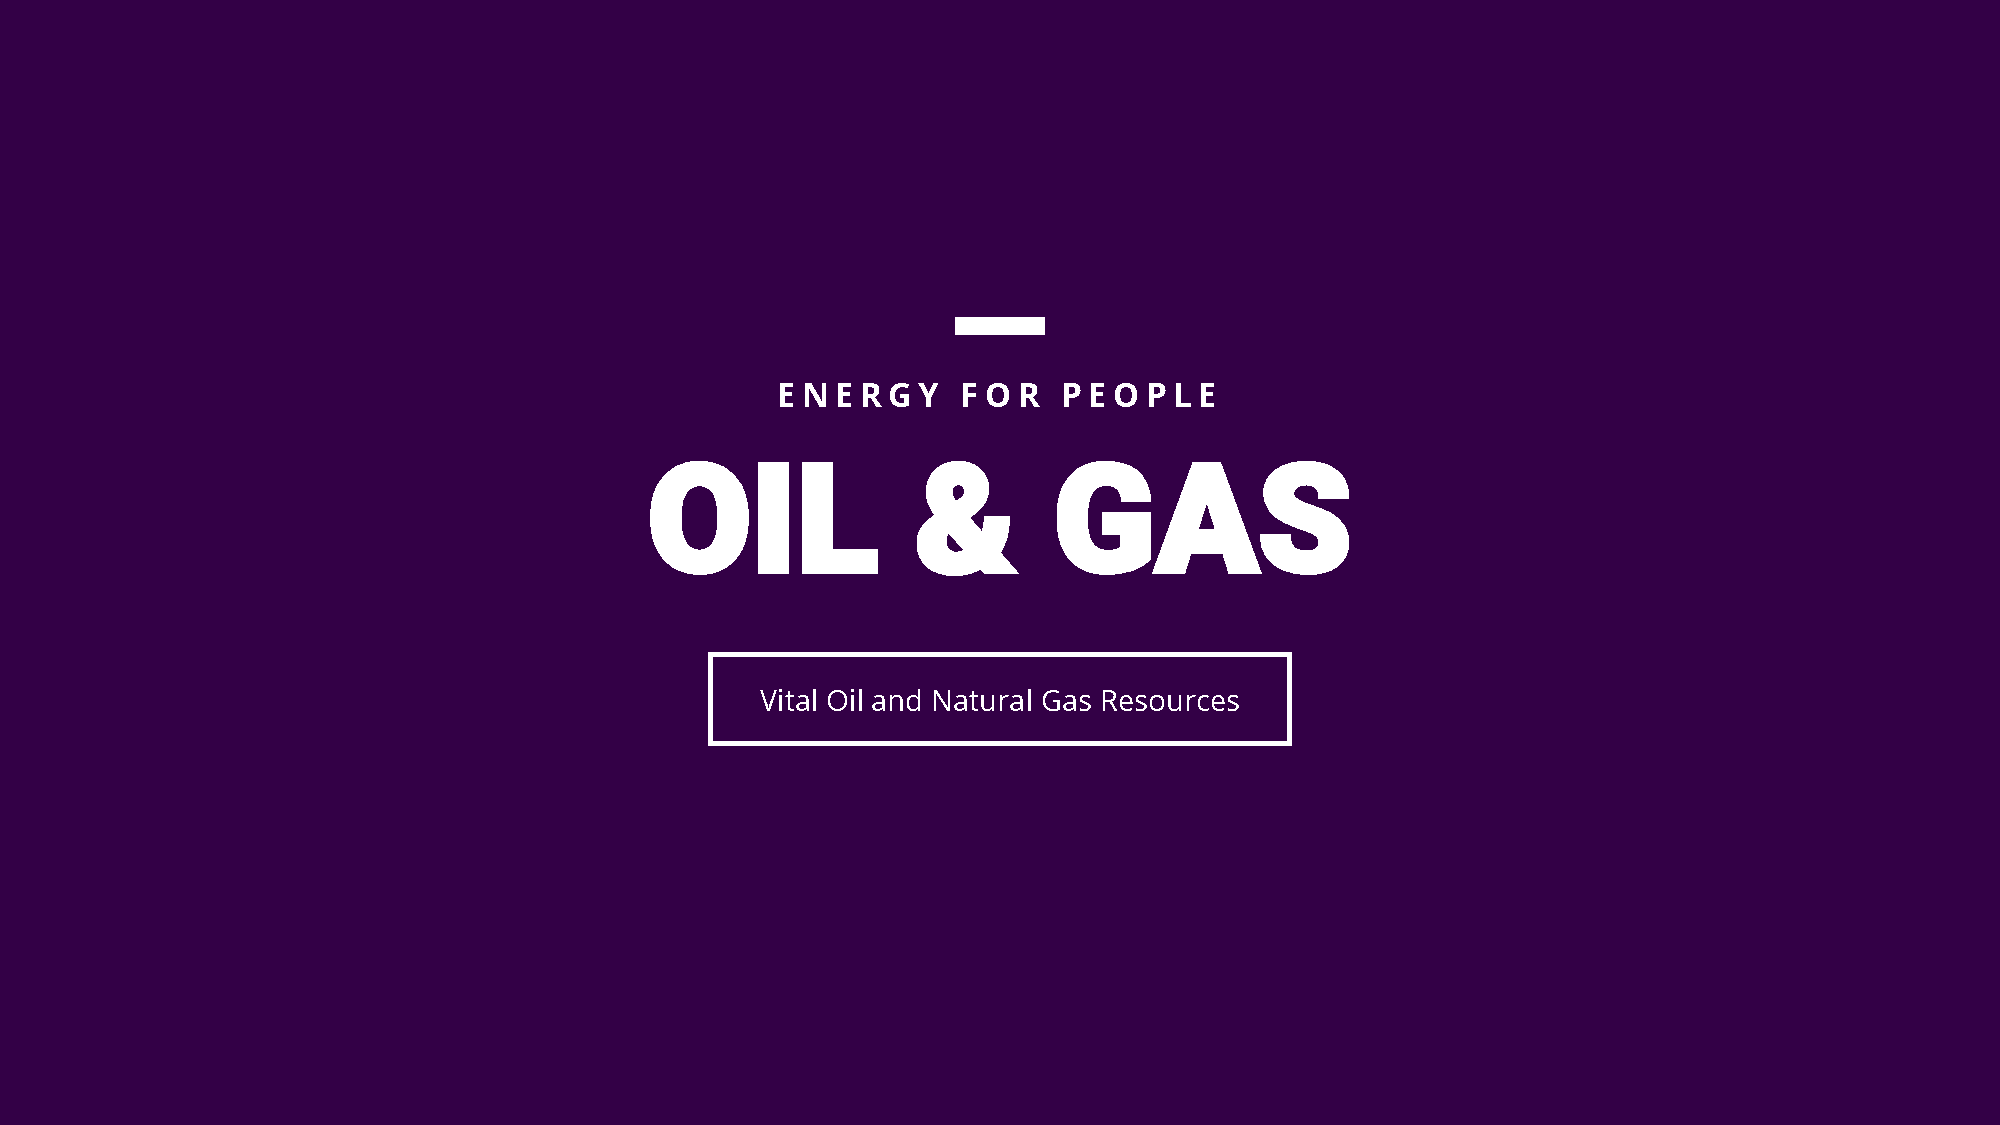 oil-and-gas-powerpoint-template-HKGBEL